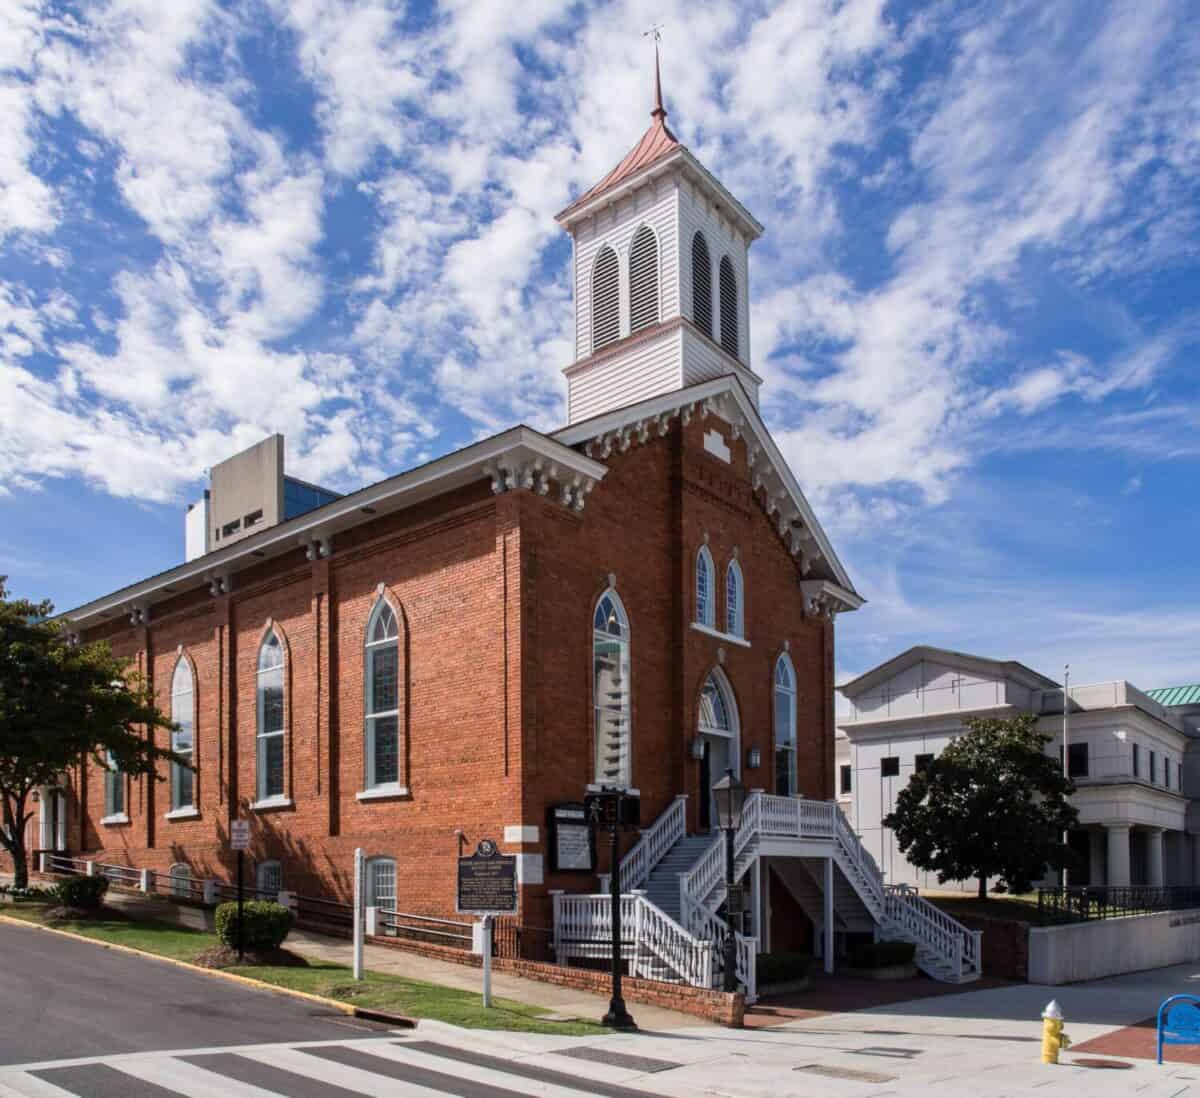 Dexter Avenue Baptist Church in Montgomery, Alabama, where Martin Luther King Jr. served as Baptist minister.